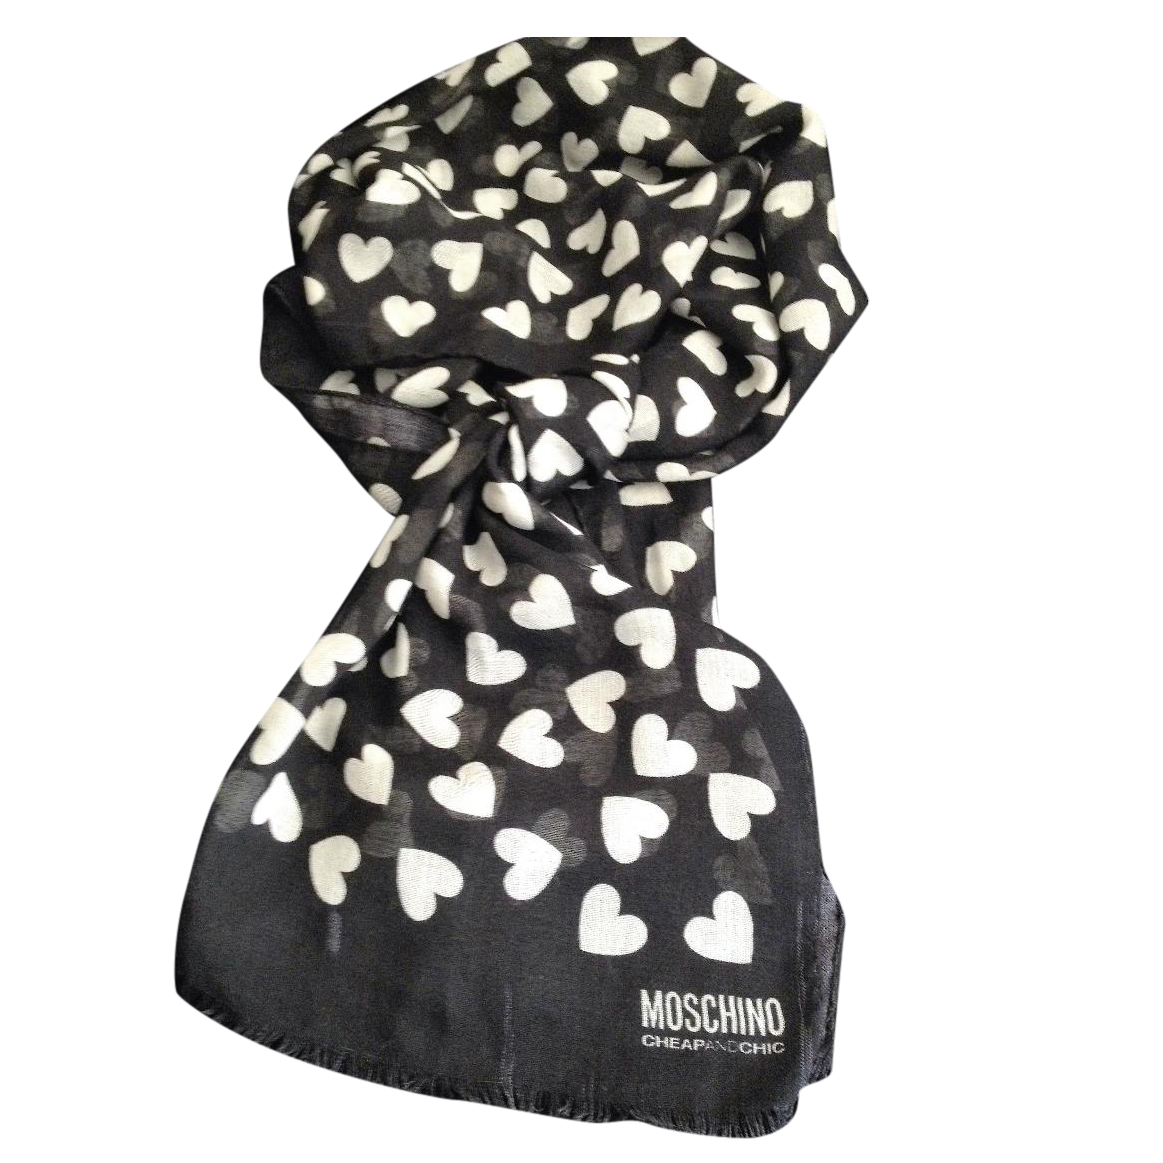 Moschino Cheap And Chic Scarf | HEWI